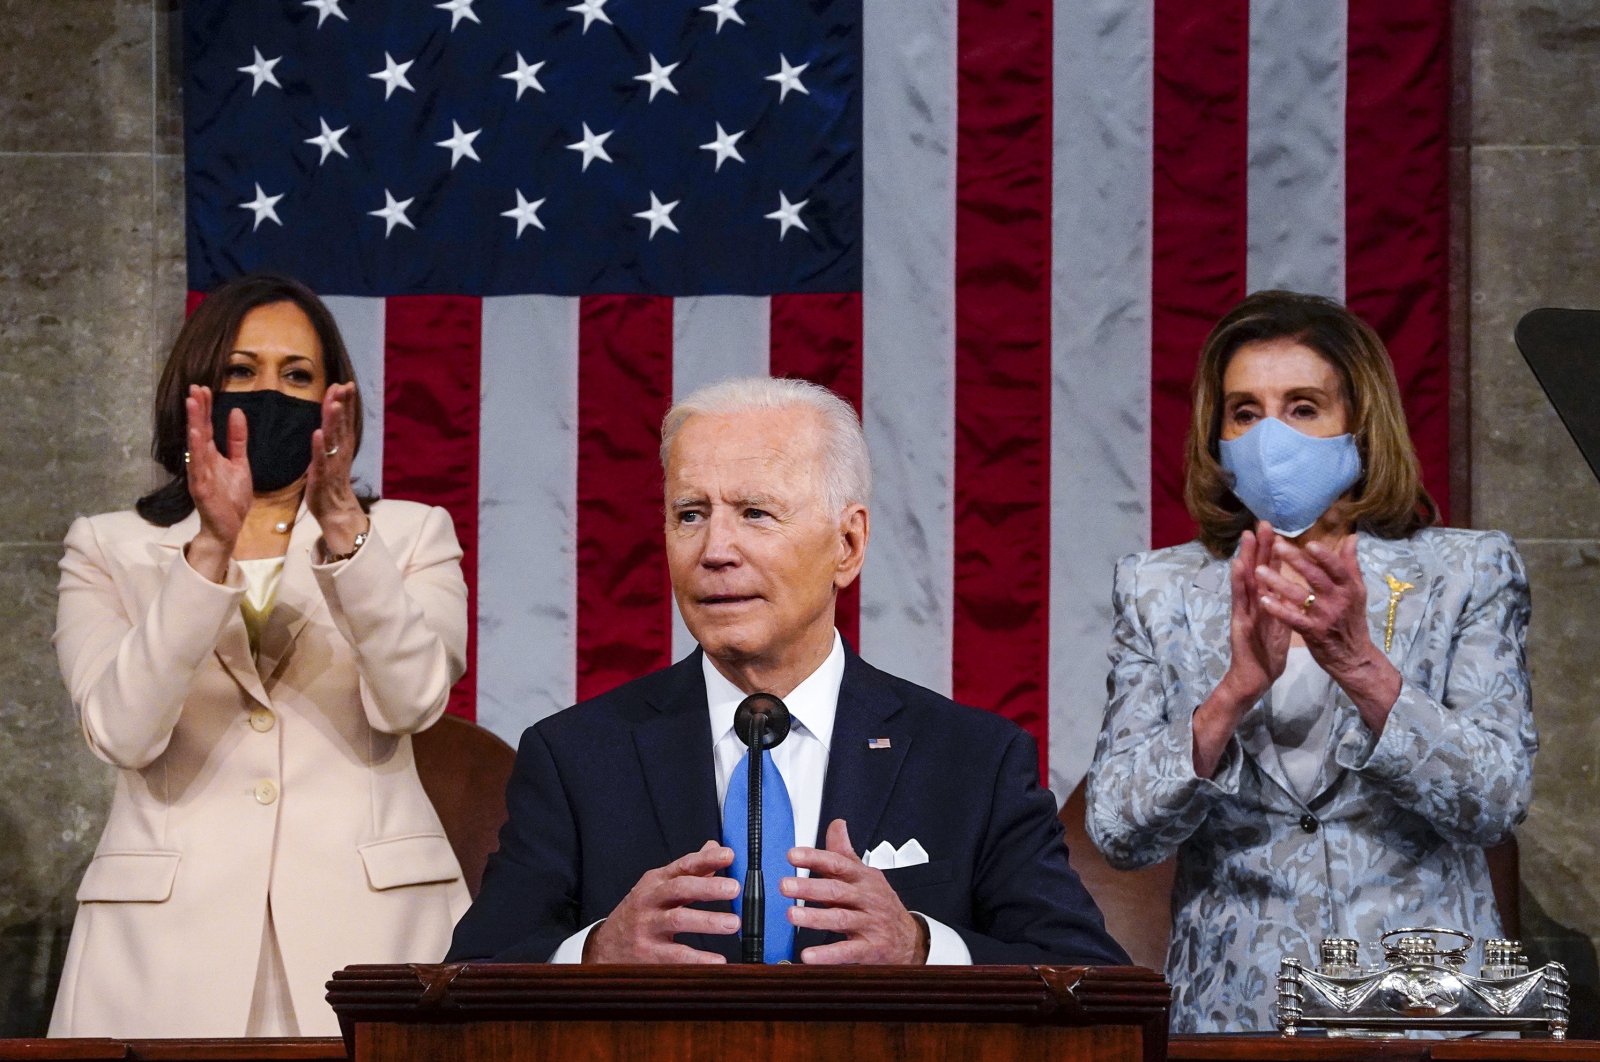 Vice President Kamala Harris and House Speaker Nancy Pelosi of Calif., stand and applaud as President Joe Biden addresses a joint session of Congress, Wednesday, April 28, 2021, in the House Chamber at the U.S. Capitol in Washington. (The Washington Post via AP)